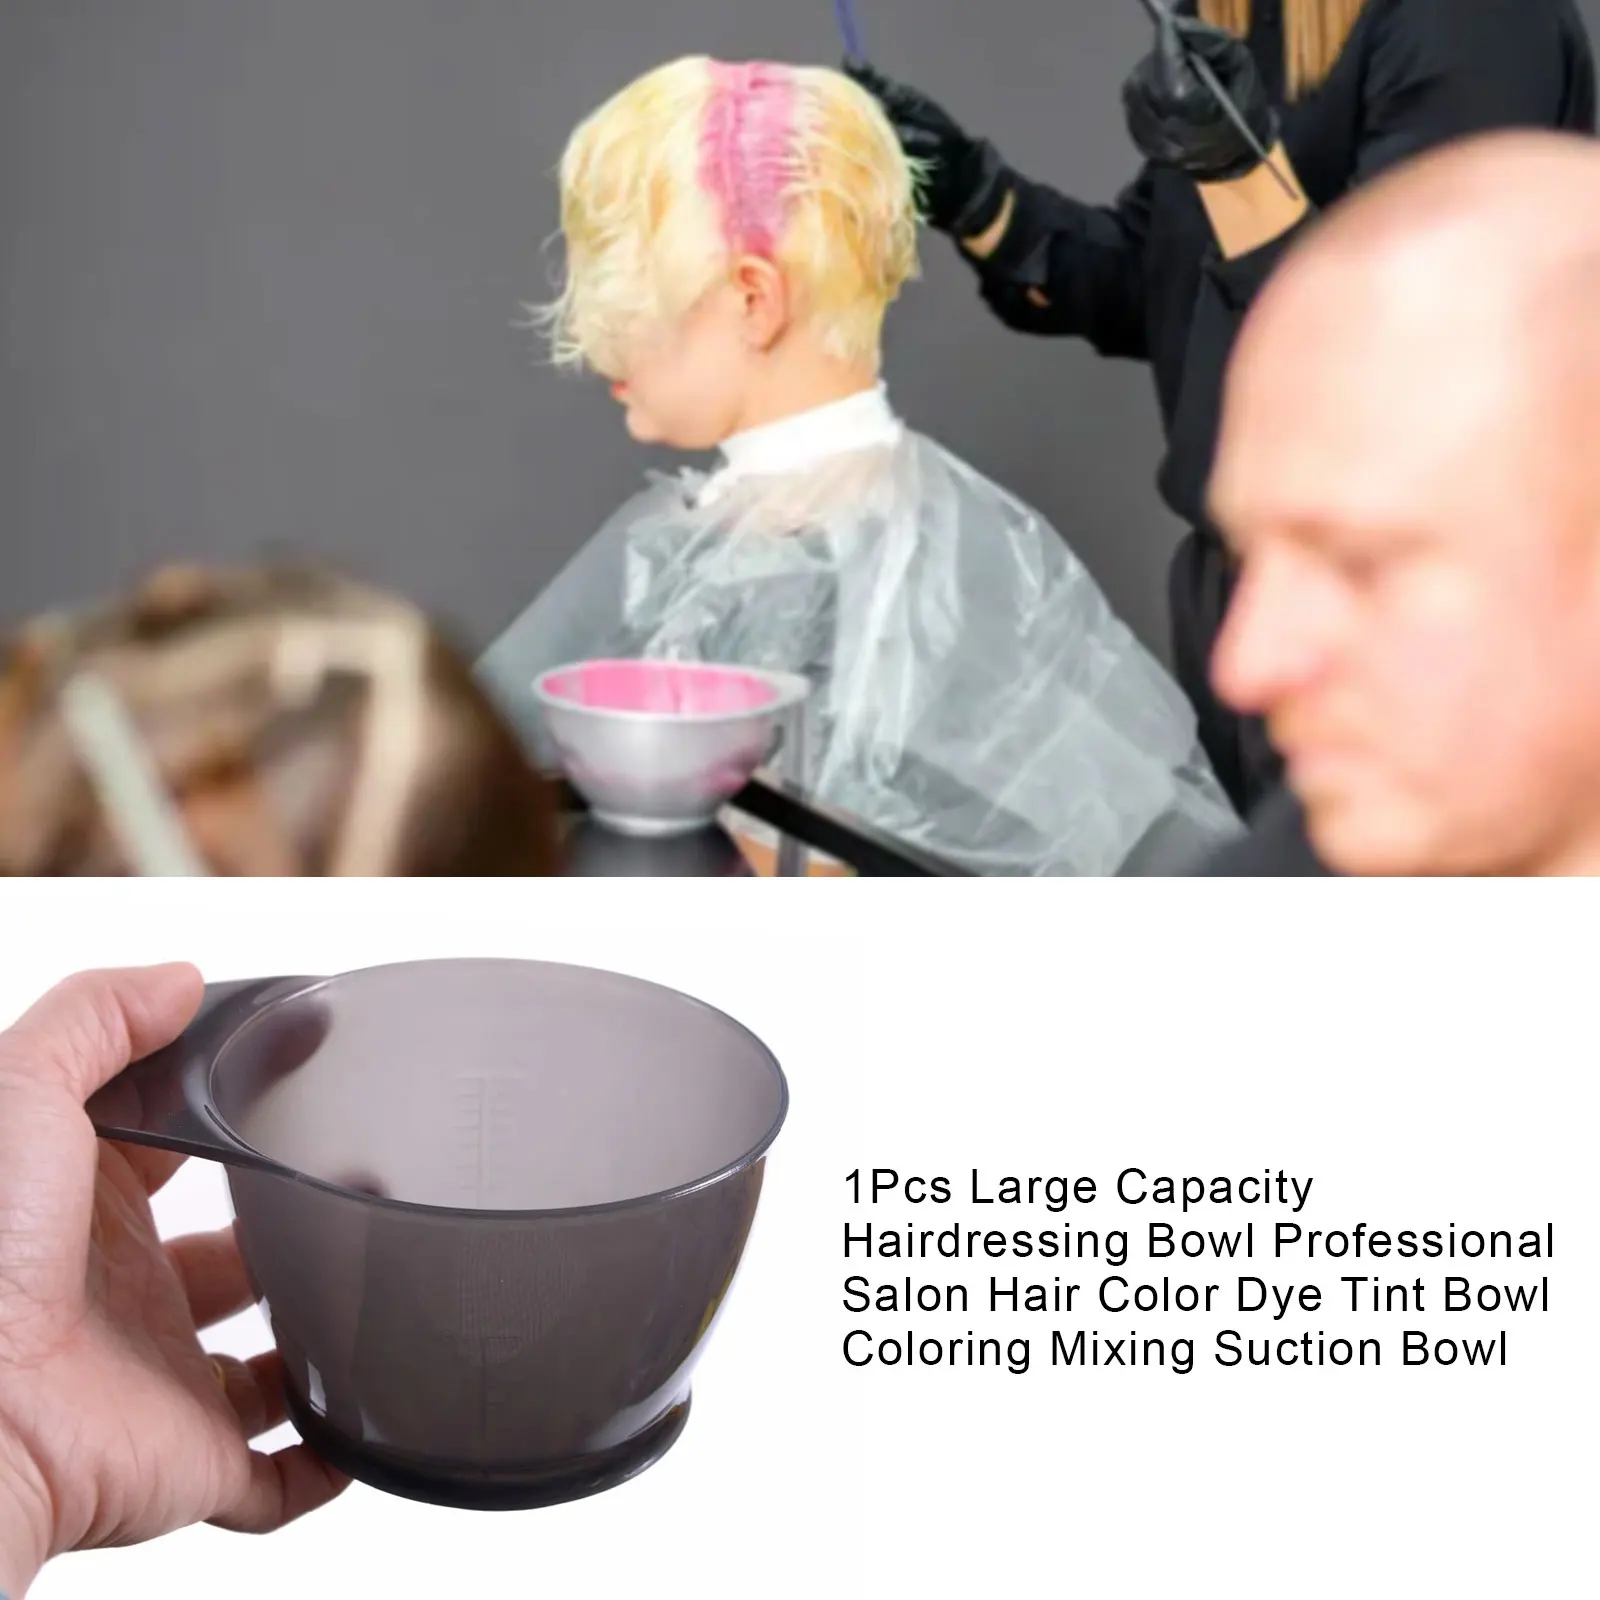 1Pcs Large Capacity Hairdressing Bowl Professional Salon Hair Coloring Dyeing Tint Bowl Hair Stying Mixing Bowl For Barber Shop